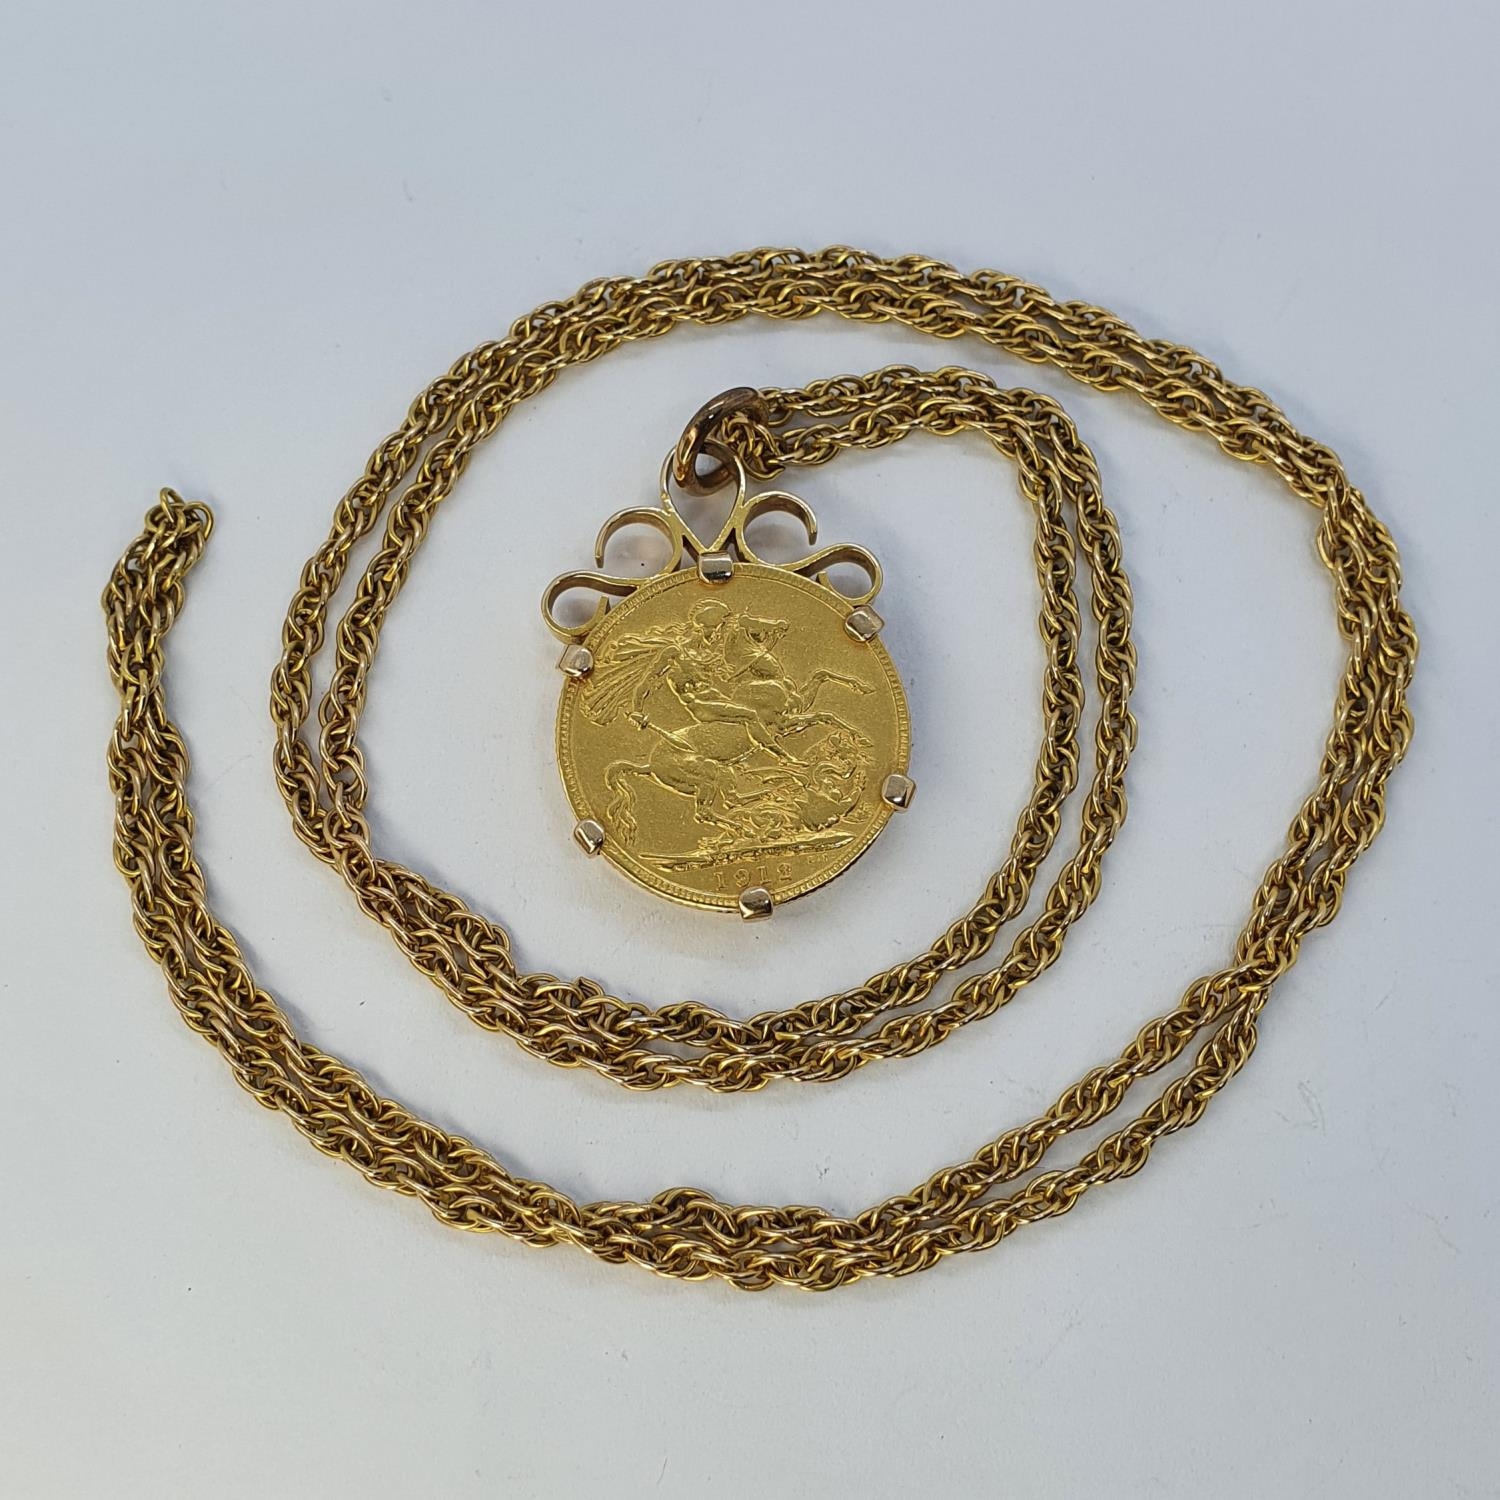 A George V sovereign, 1912, mounted as a pendant, on a chain - Image 2 of 3